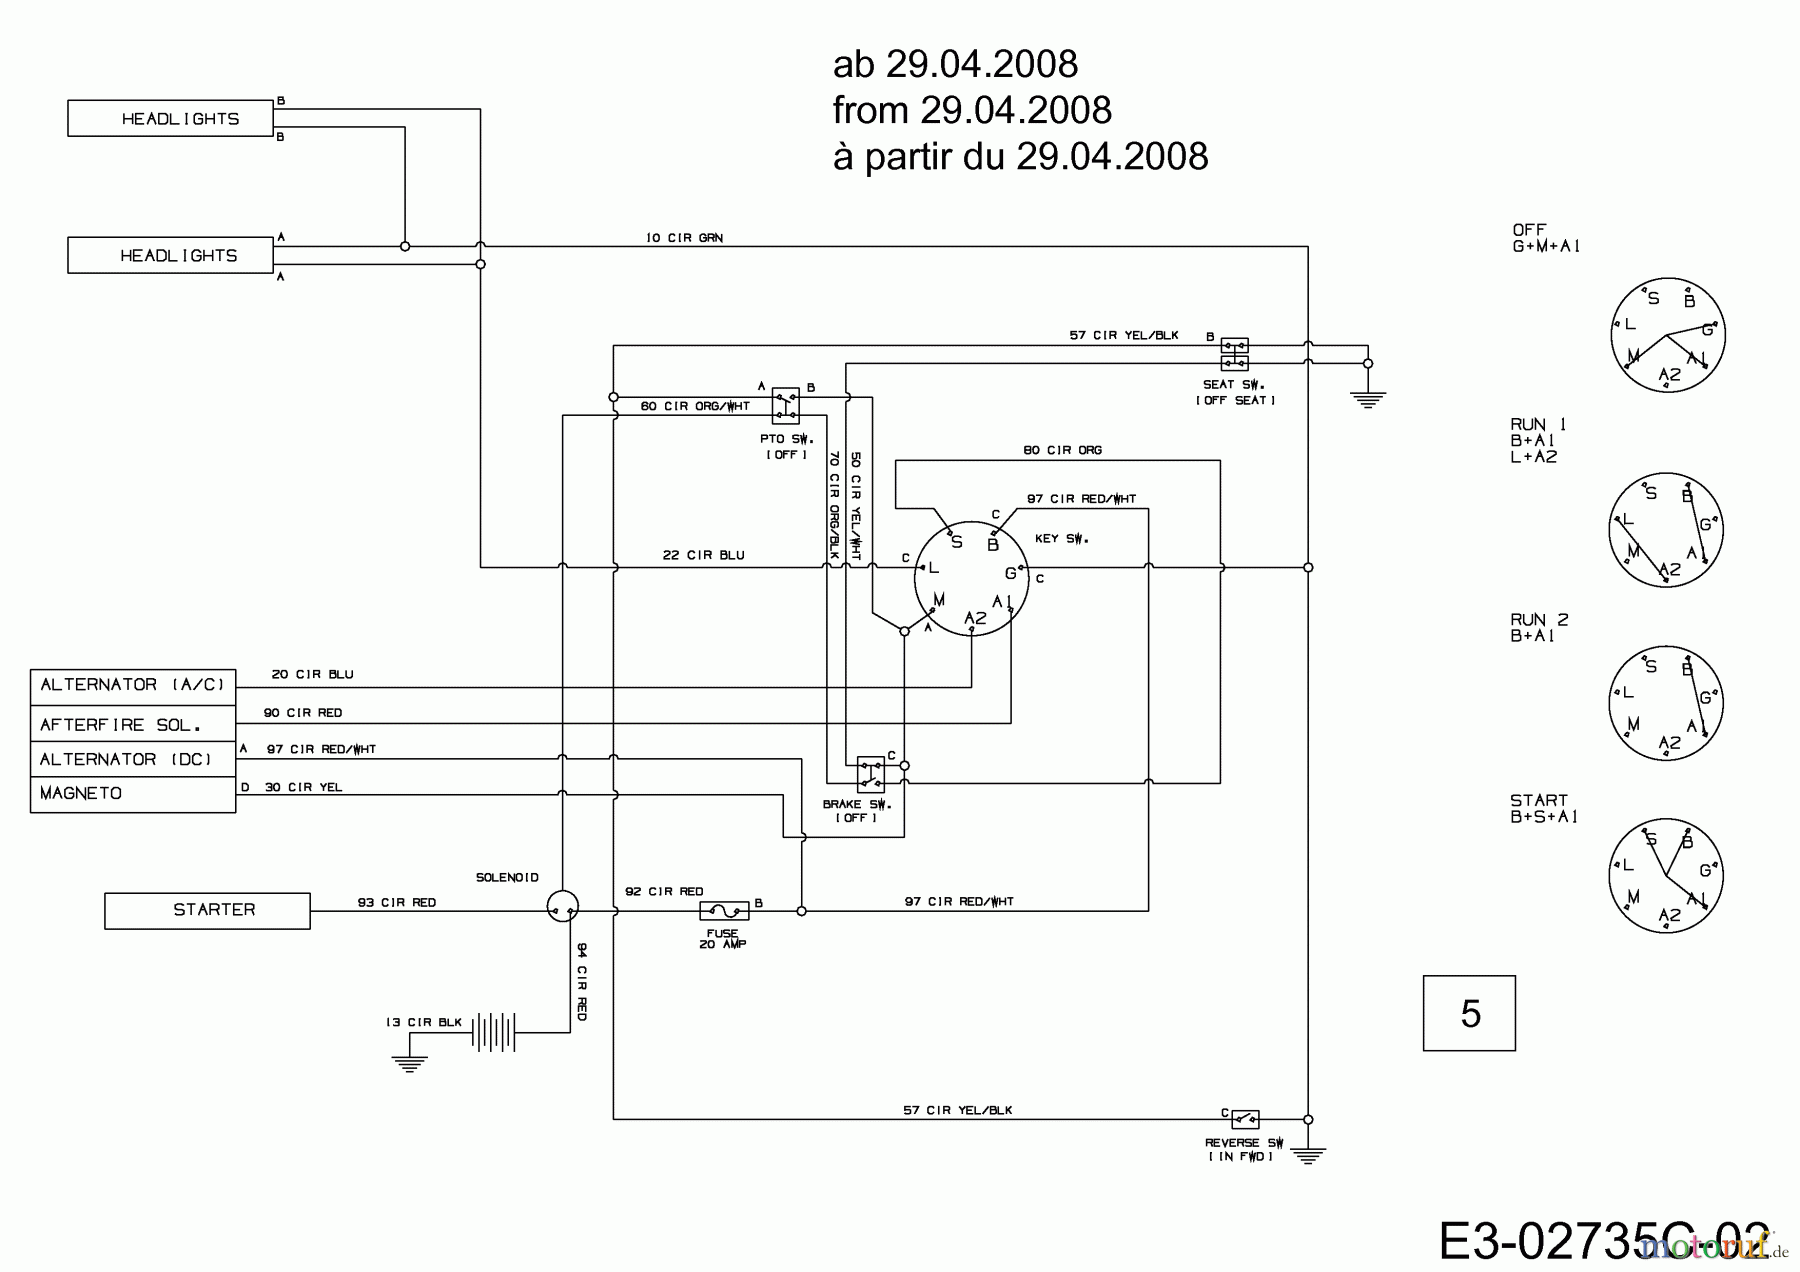  Edenparc Lawn tractors EP 175/107 H 13AN799G408  (2008) Wiring diagram from 29.04.2008